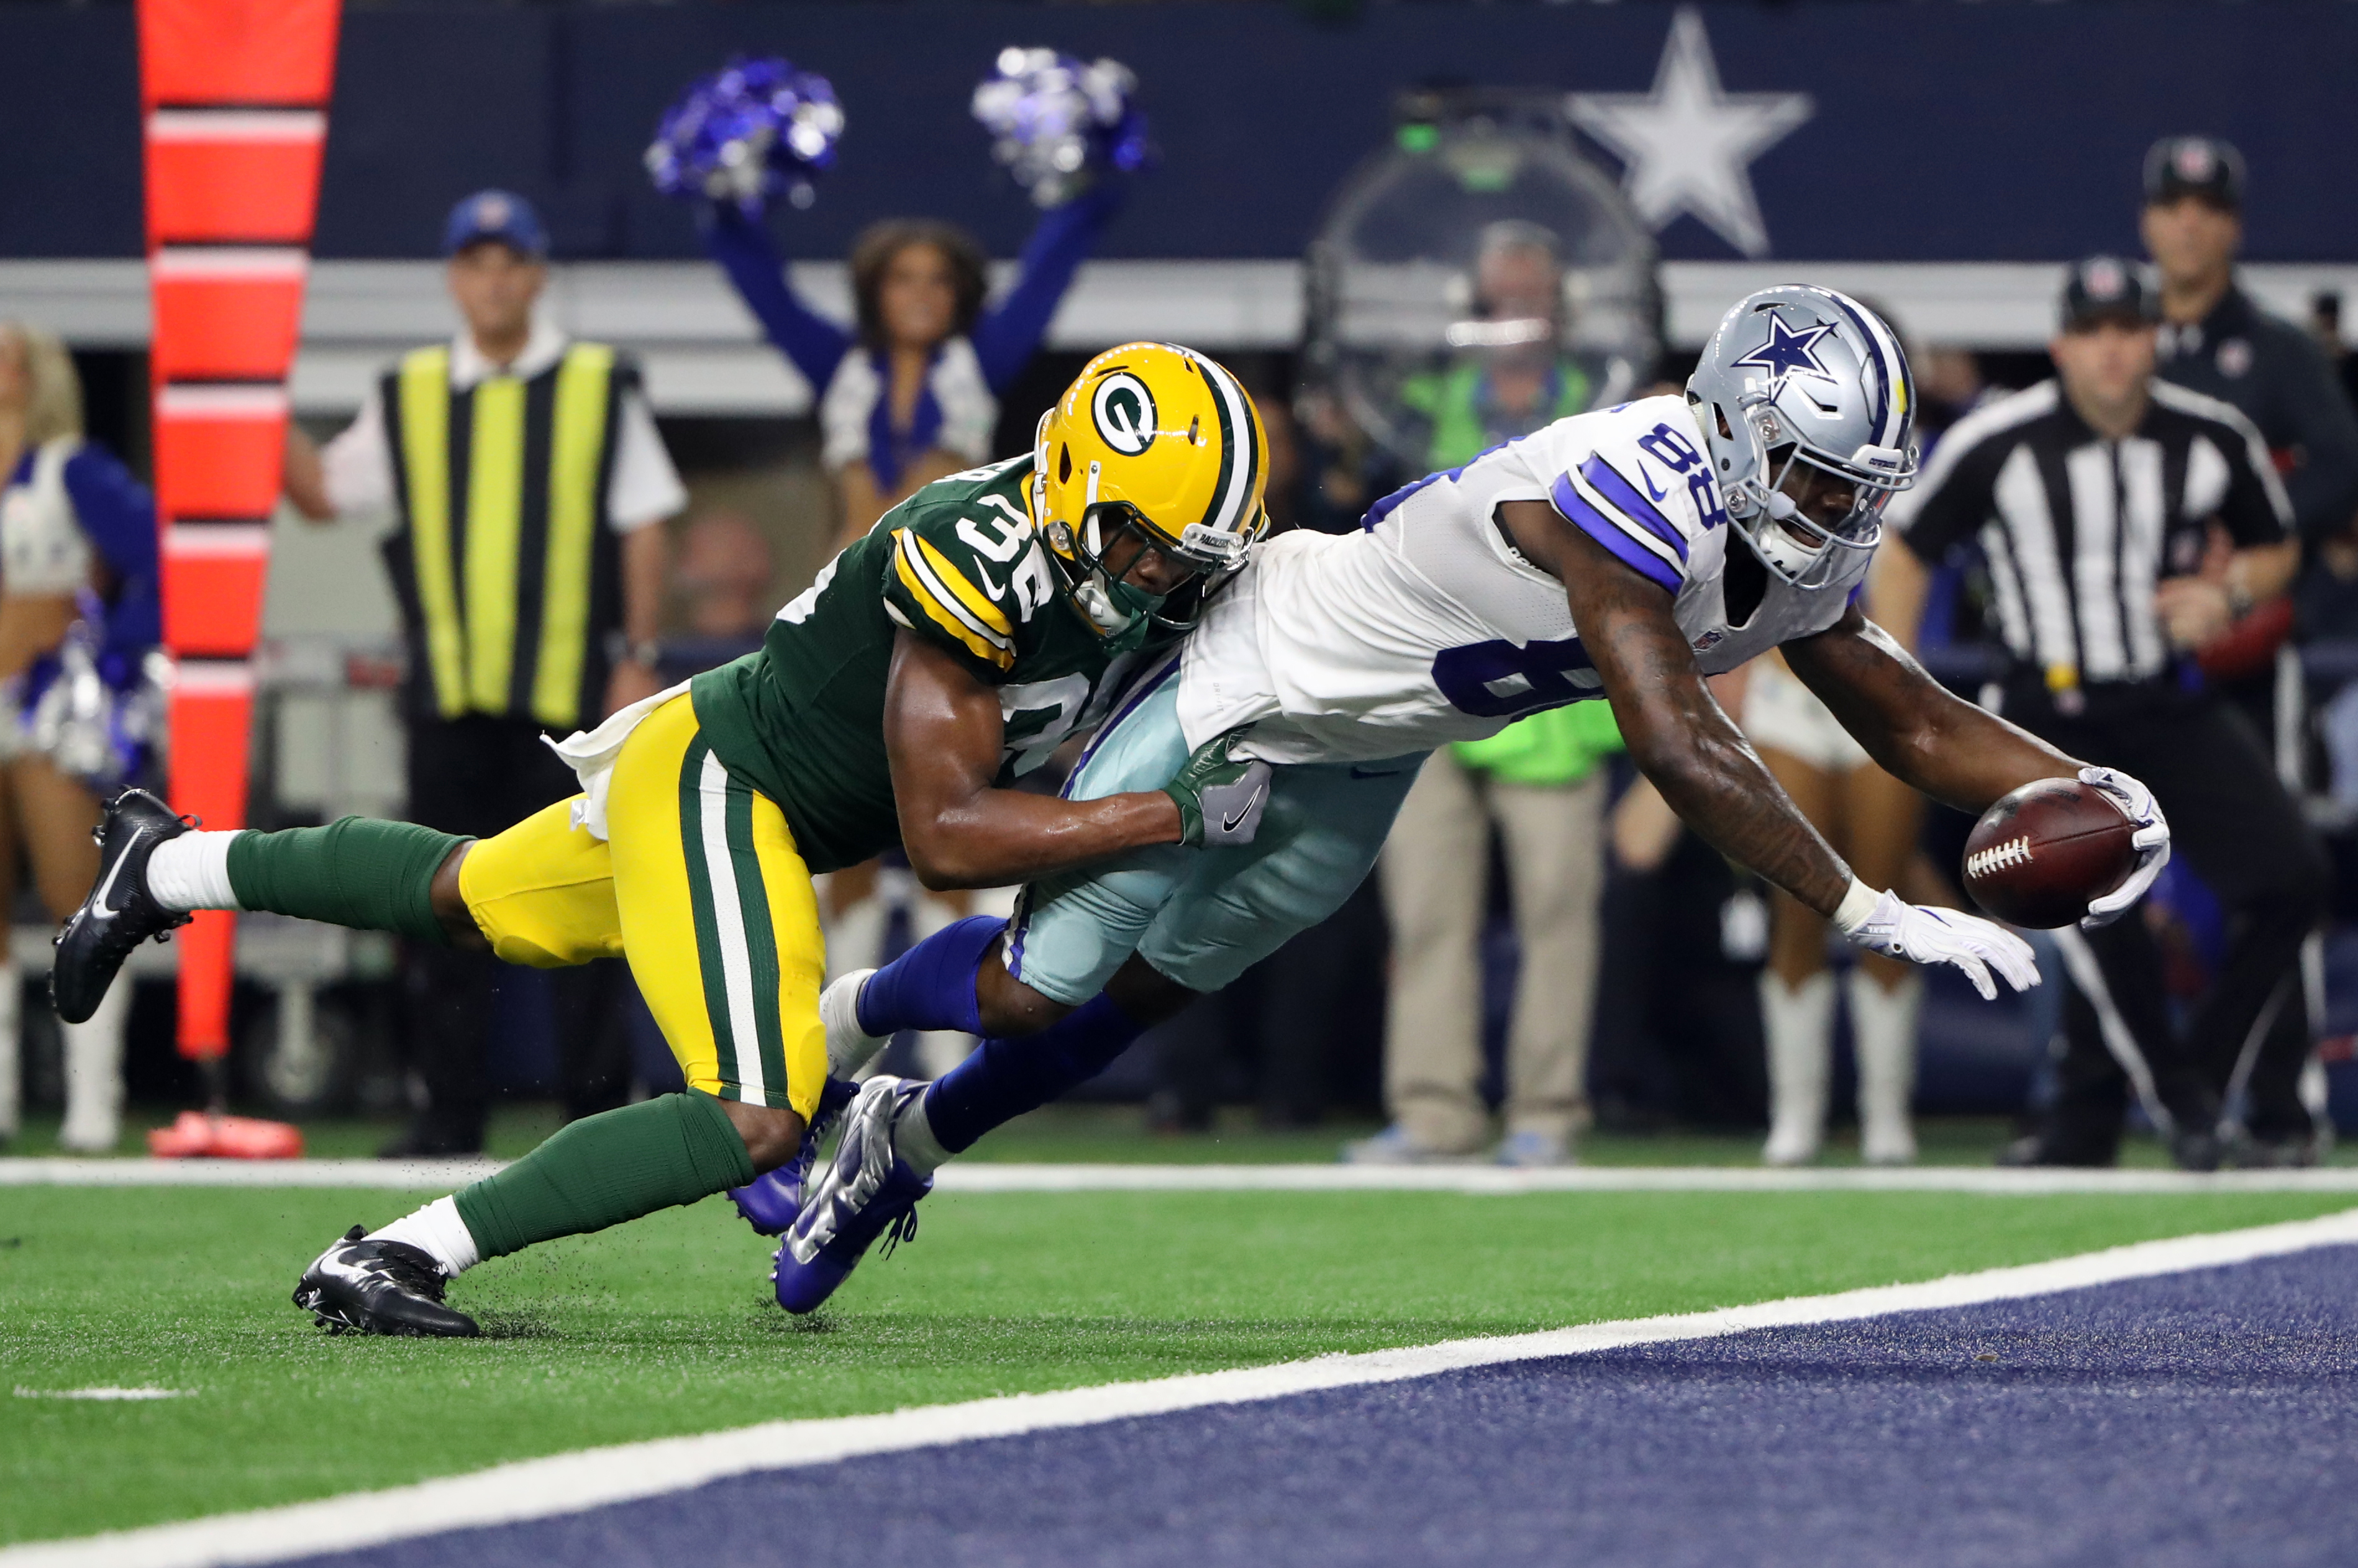 Dallas Cowboys wide receiver Dez Bryant (88) catches a touchdown against Green Bay Packers cornerback LaDarius Gunter (36) during the fourth quarter in the NFC Divisional playoff game at AT&T Stadium Jan. 15, 2017. Photo: Kevin Jairaj-USA TODAY Sports